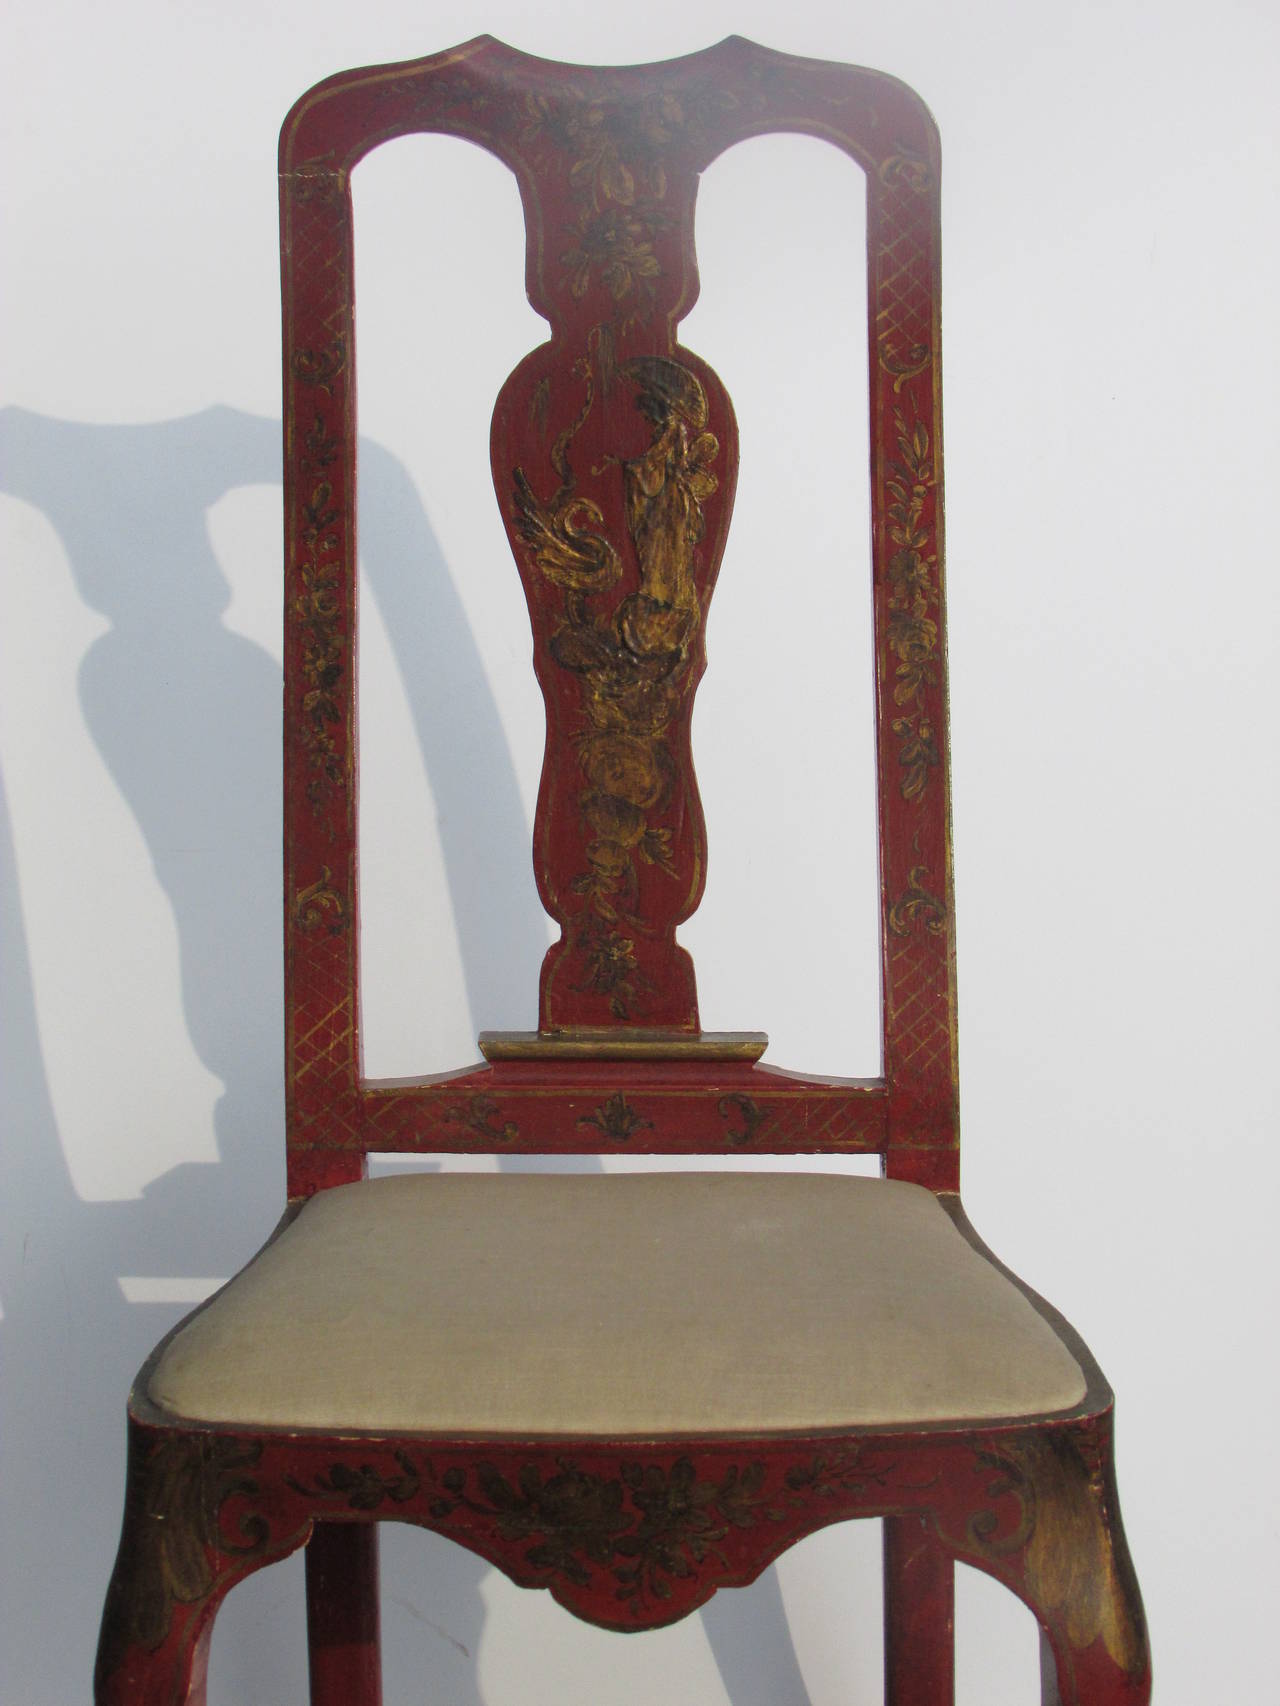 In the 18th century Venetian style a tall back chair in original rich crimson painted and finely gilded raised Chinoiserie decoration over underlying gesso. Stamped on inside of seat rail - made in Italy. circa 1940